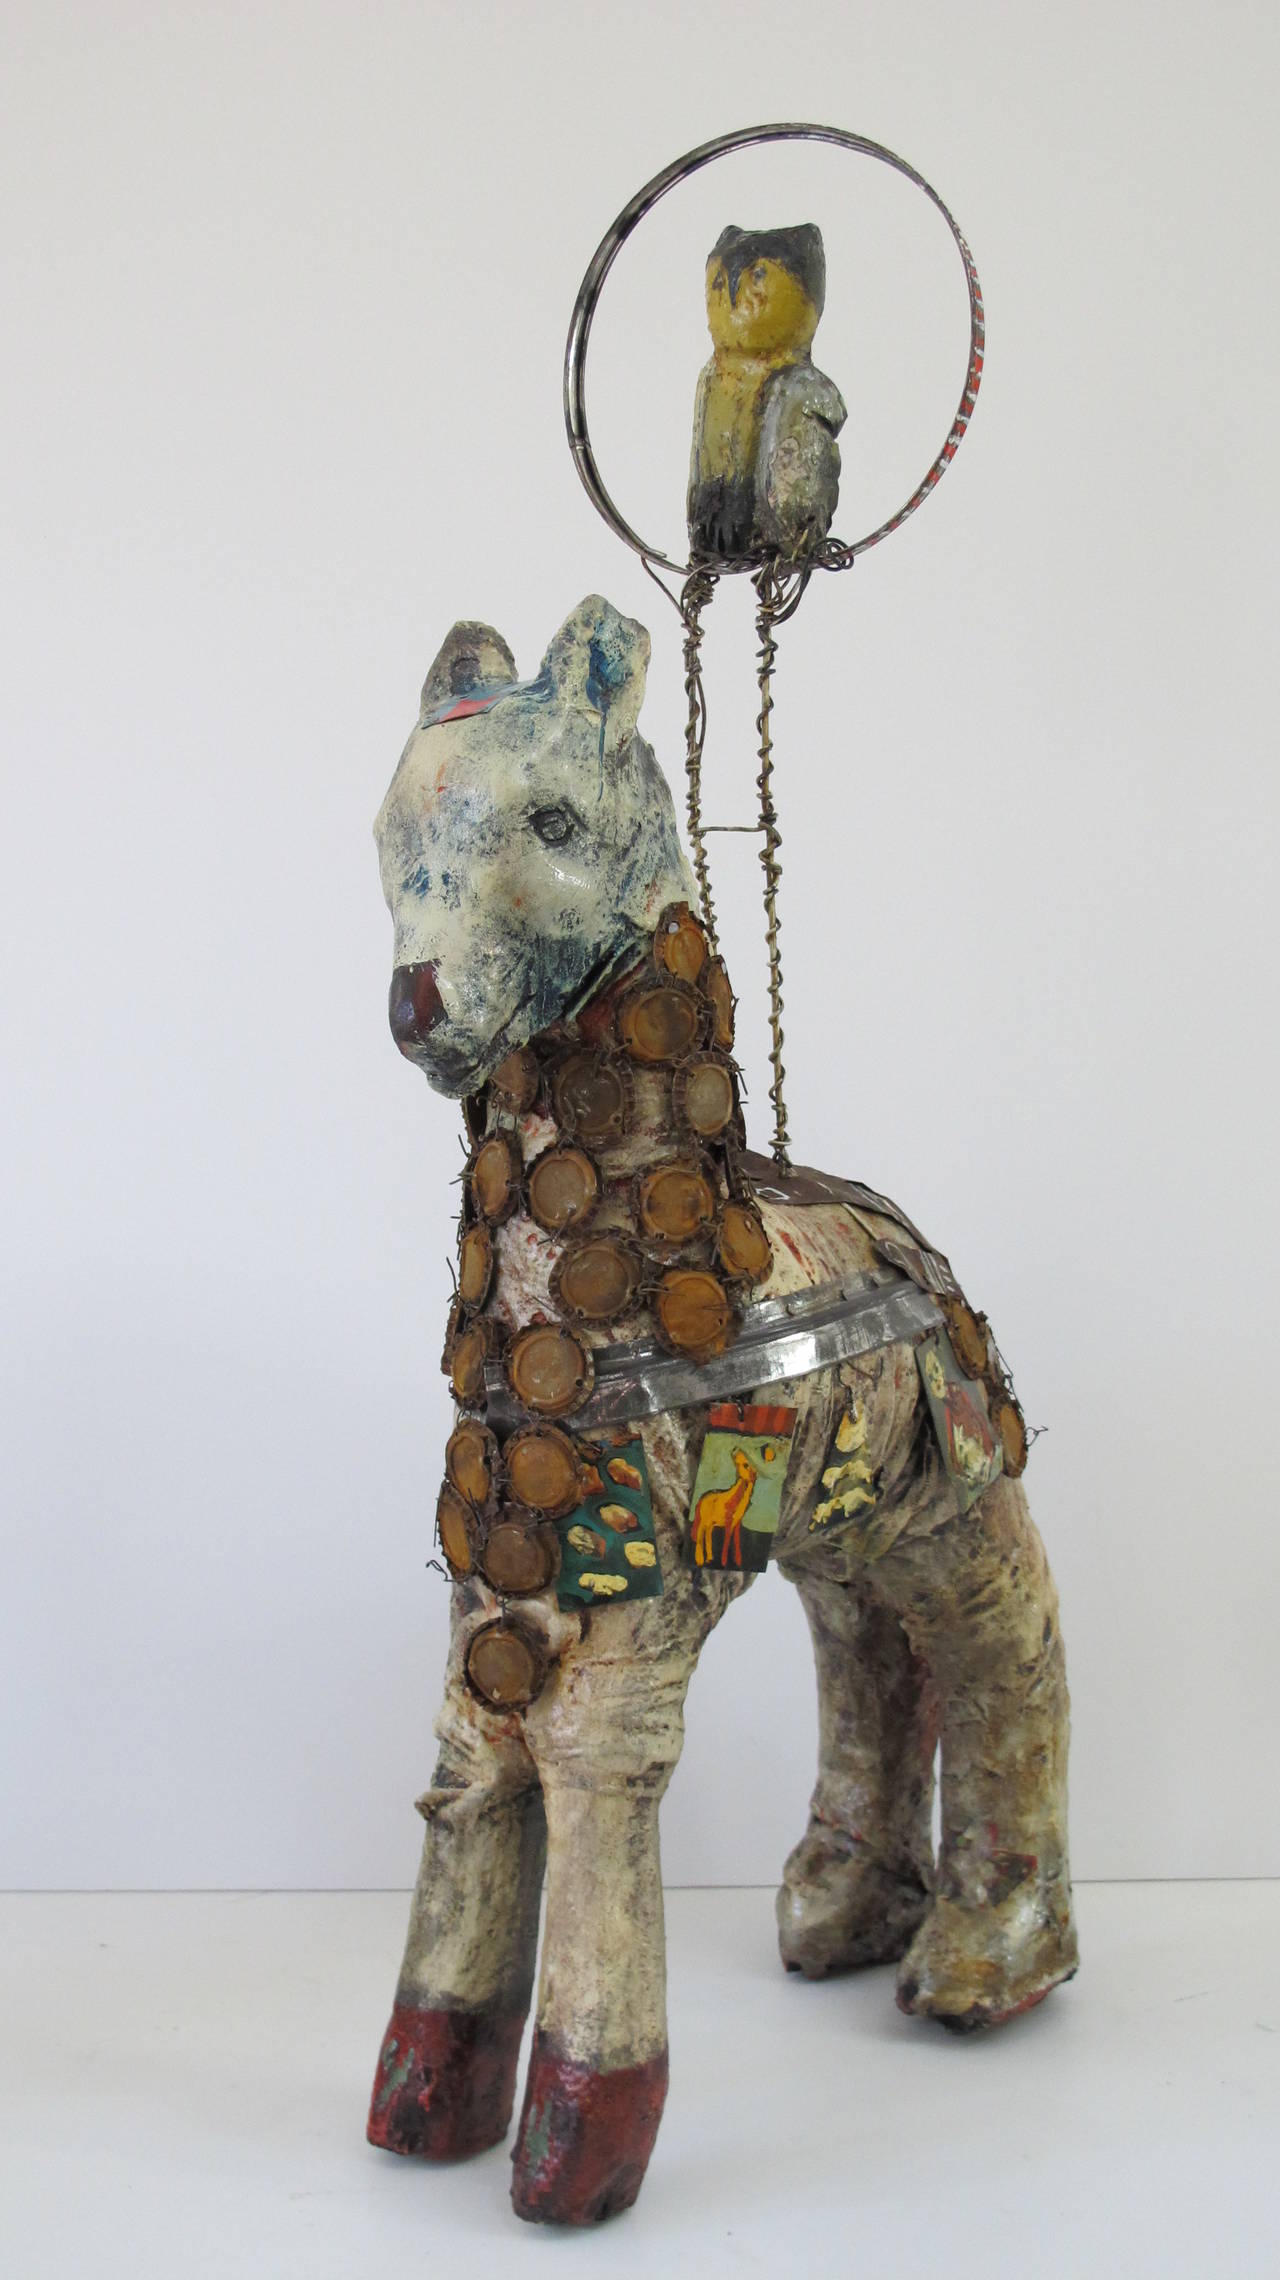 Sculpture by self-taught artist Terry Turrell of carved wood horse with an owl perched above in a ring. The sculpture is painted and has applied pieces of cut tin and is draped with vintage bottle caps wired together.